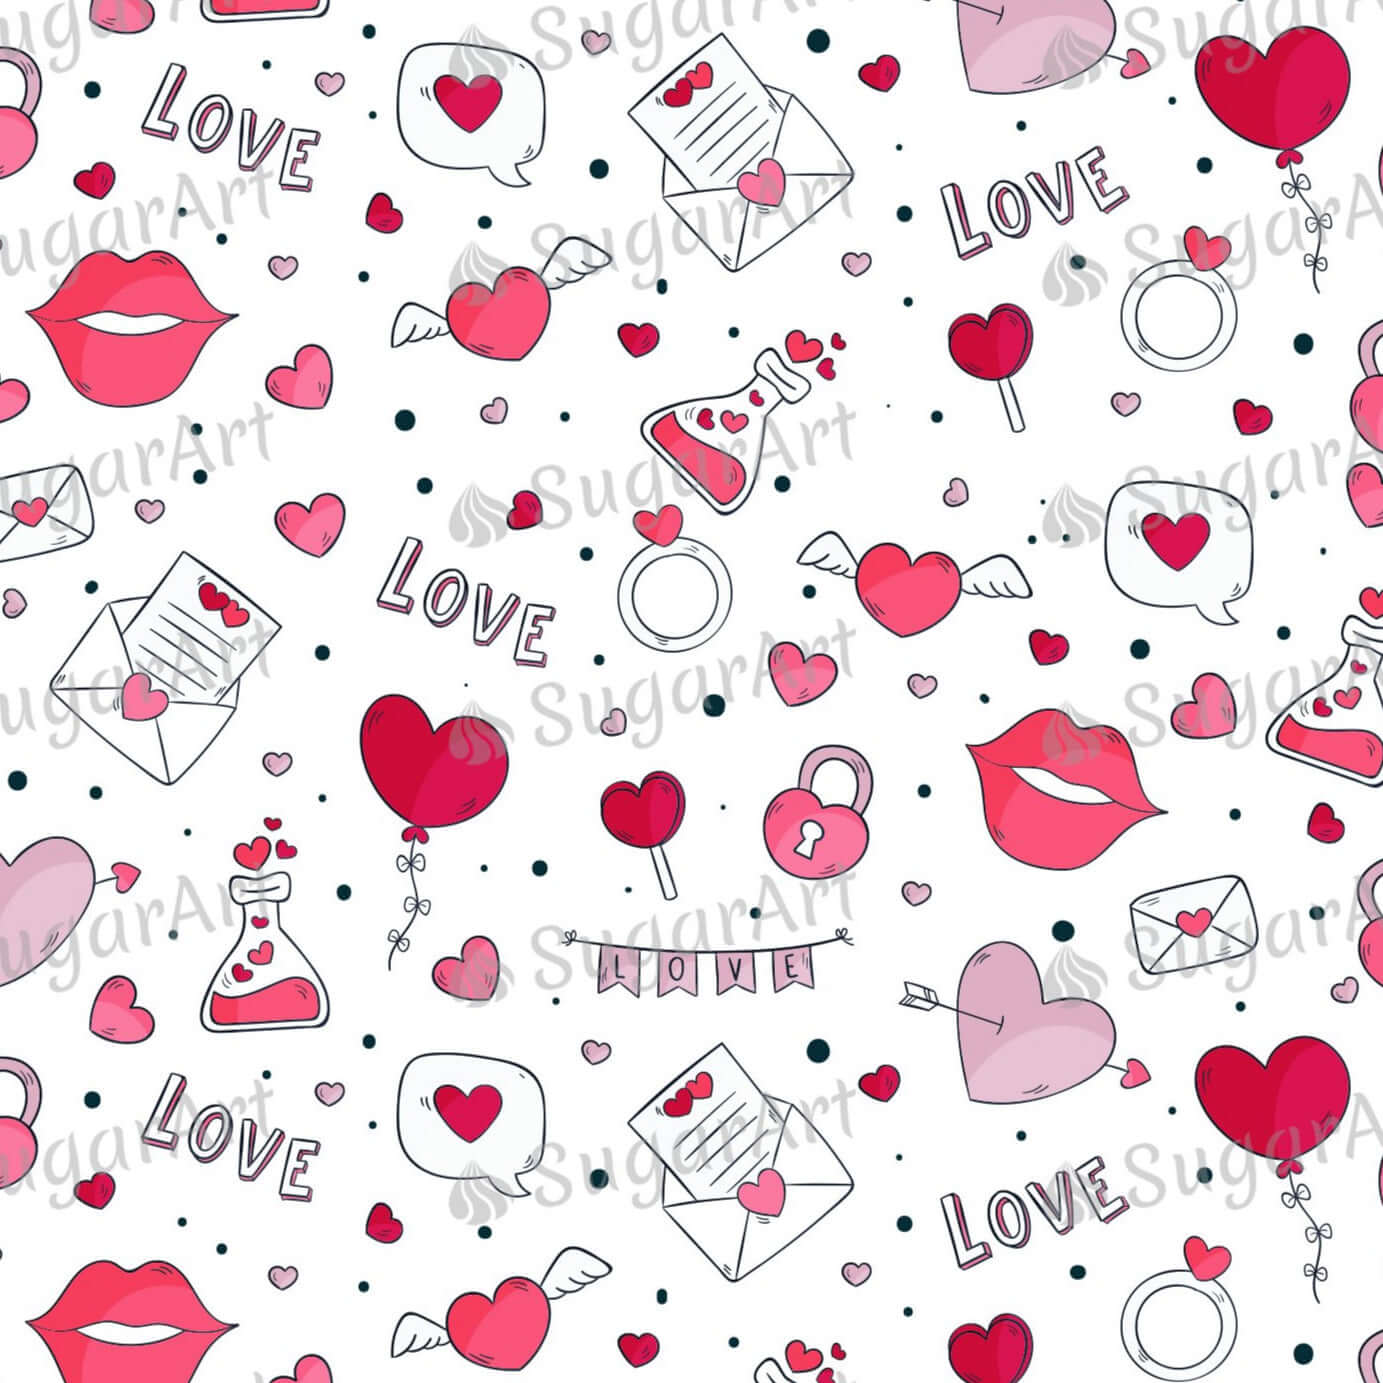 Love Potion Cute Valentine Day Background - Icing - ISA202.